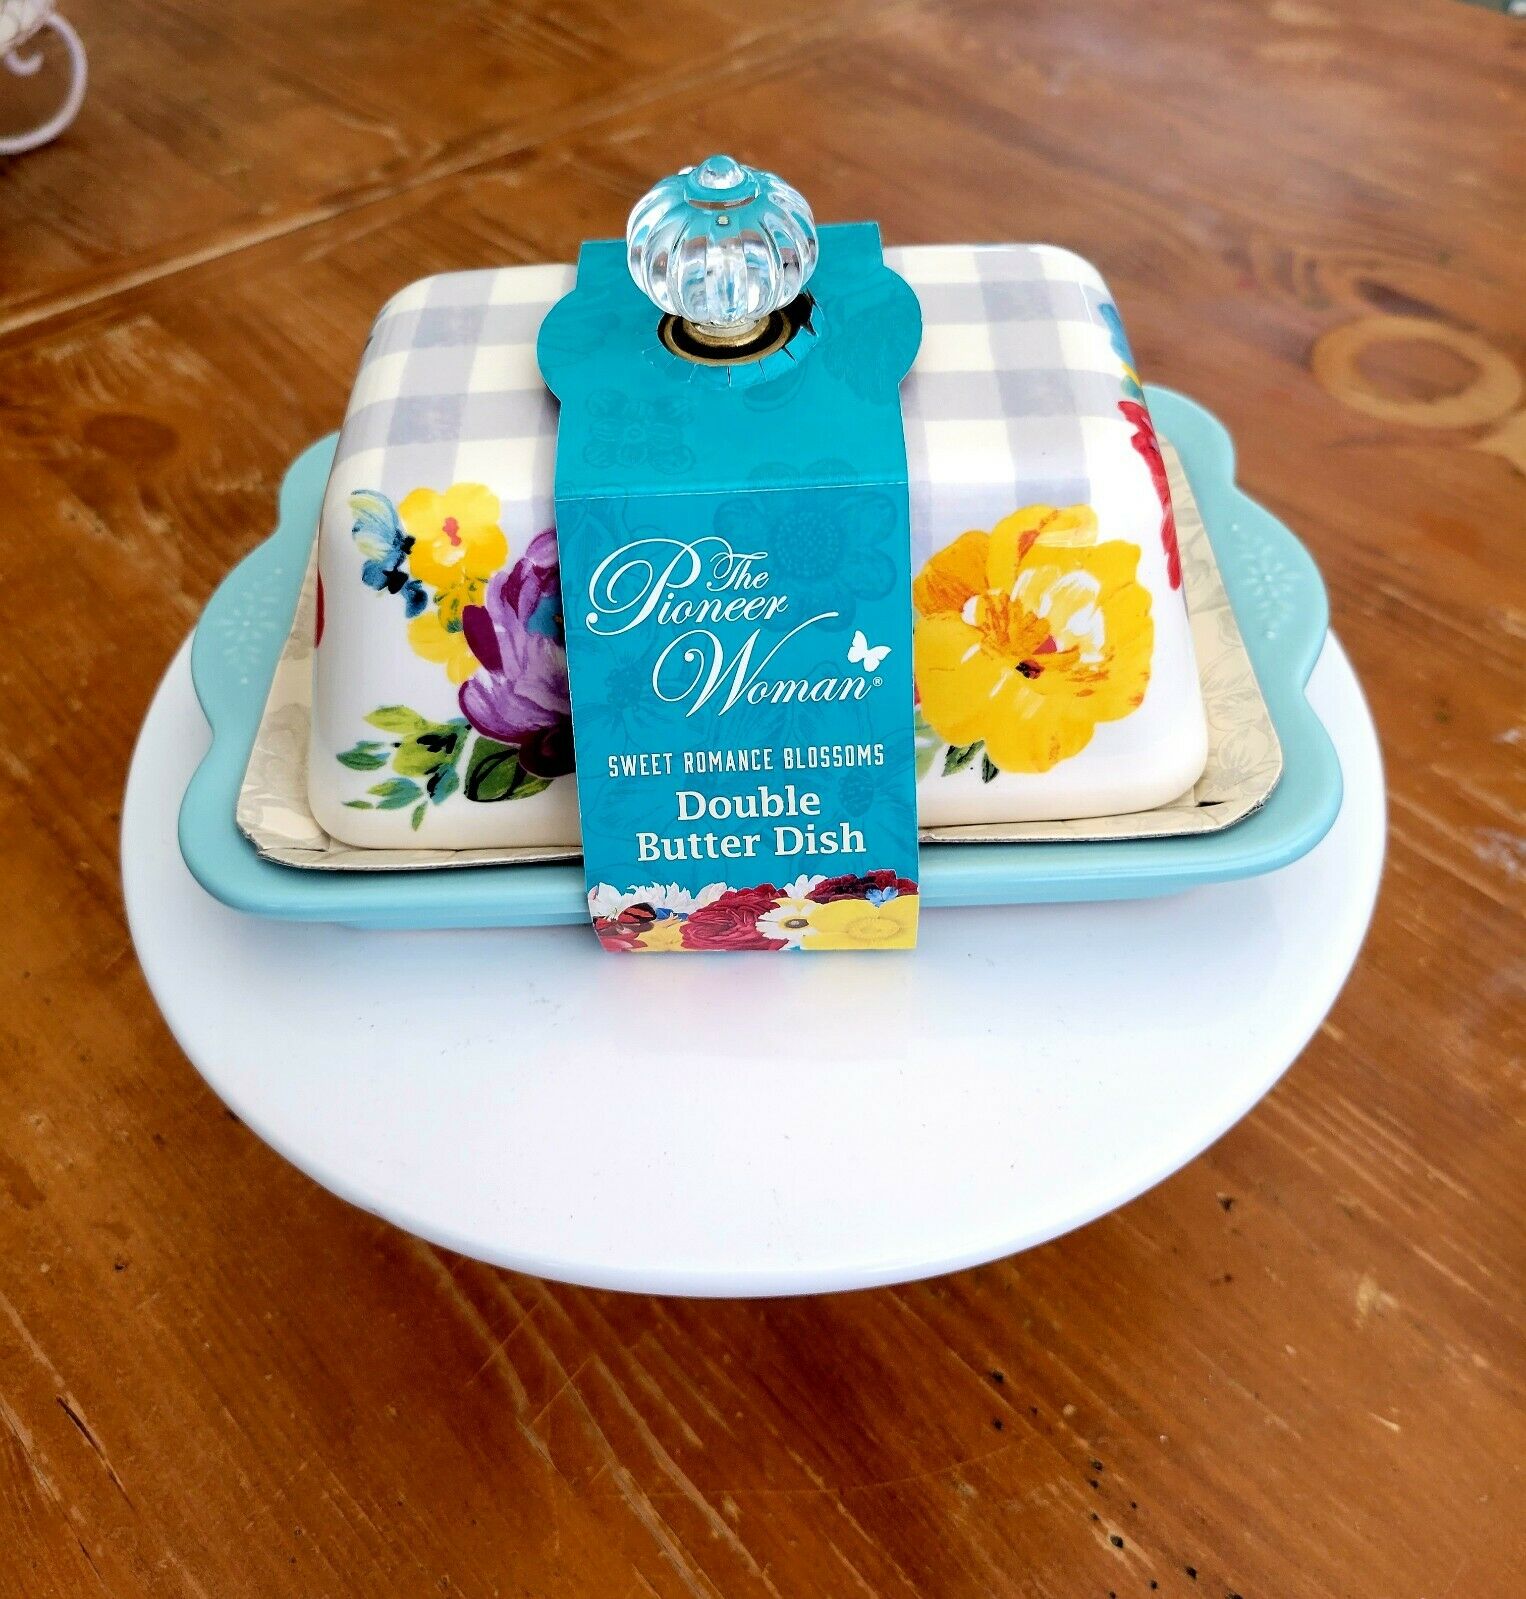 New Pioneer Woman Sweet Romance Blossoms Double Butter Dish